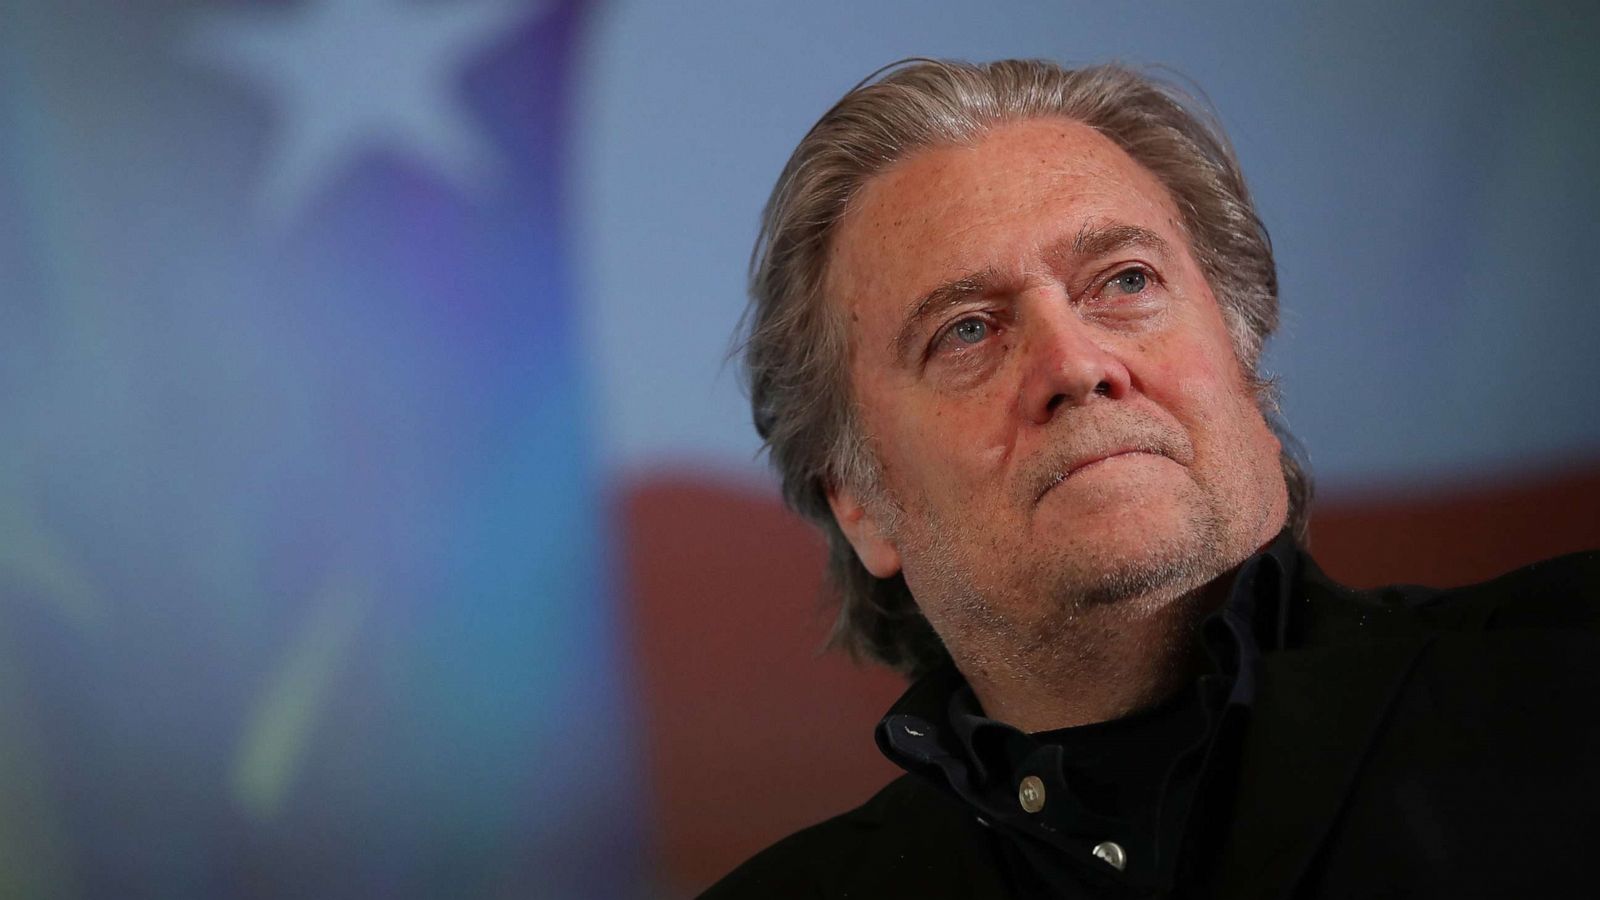 Steve Bannon is a former White House advisor to Donald Trump and one of the leading gurus of the current right-wing.